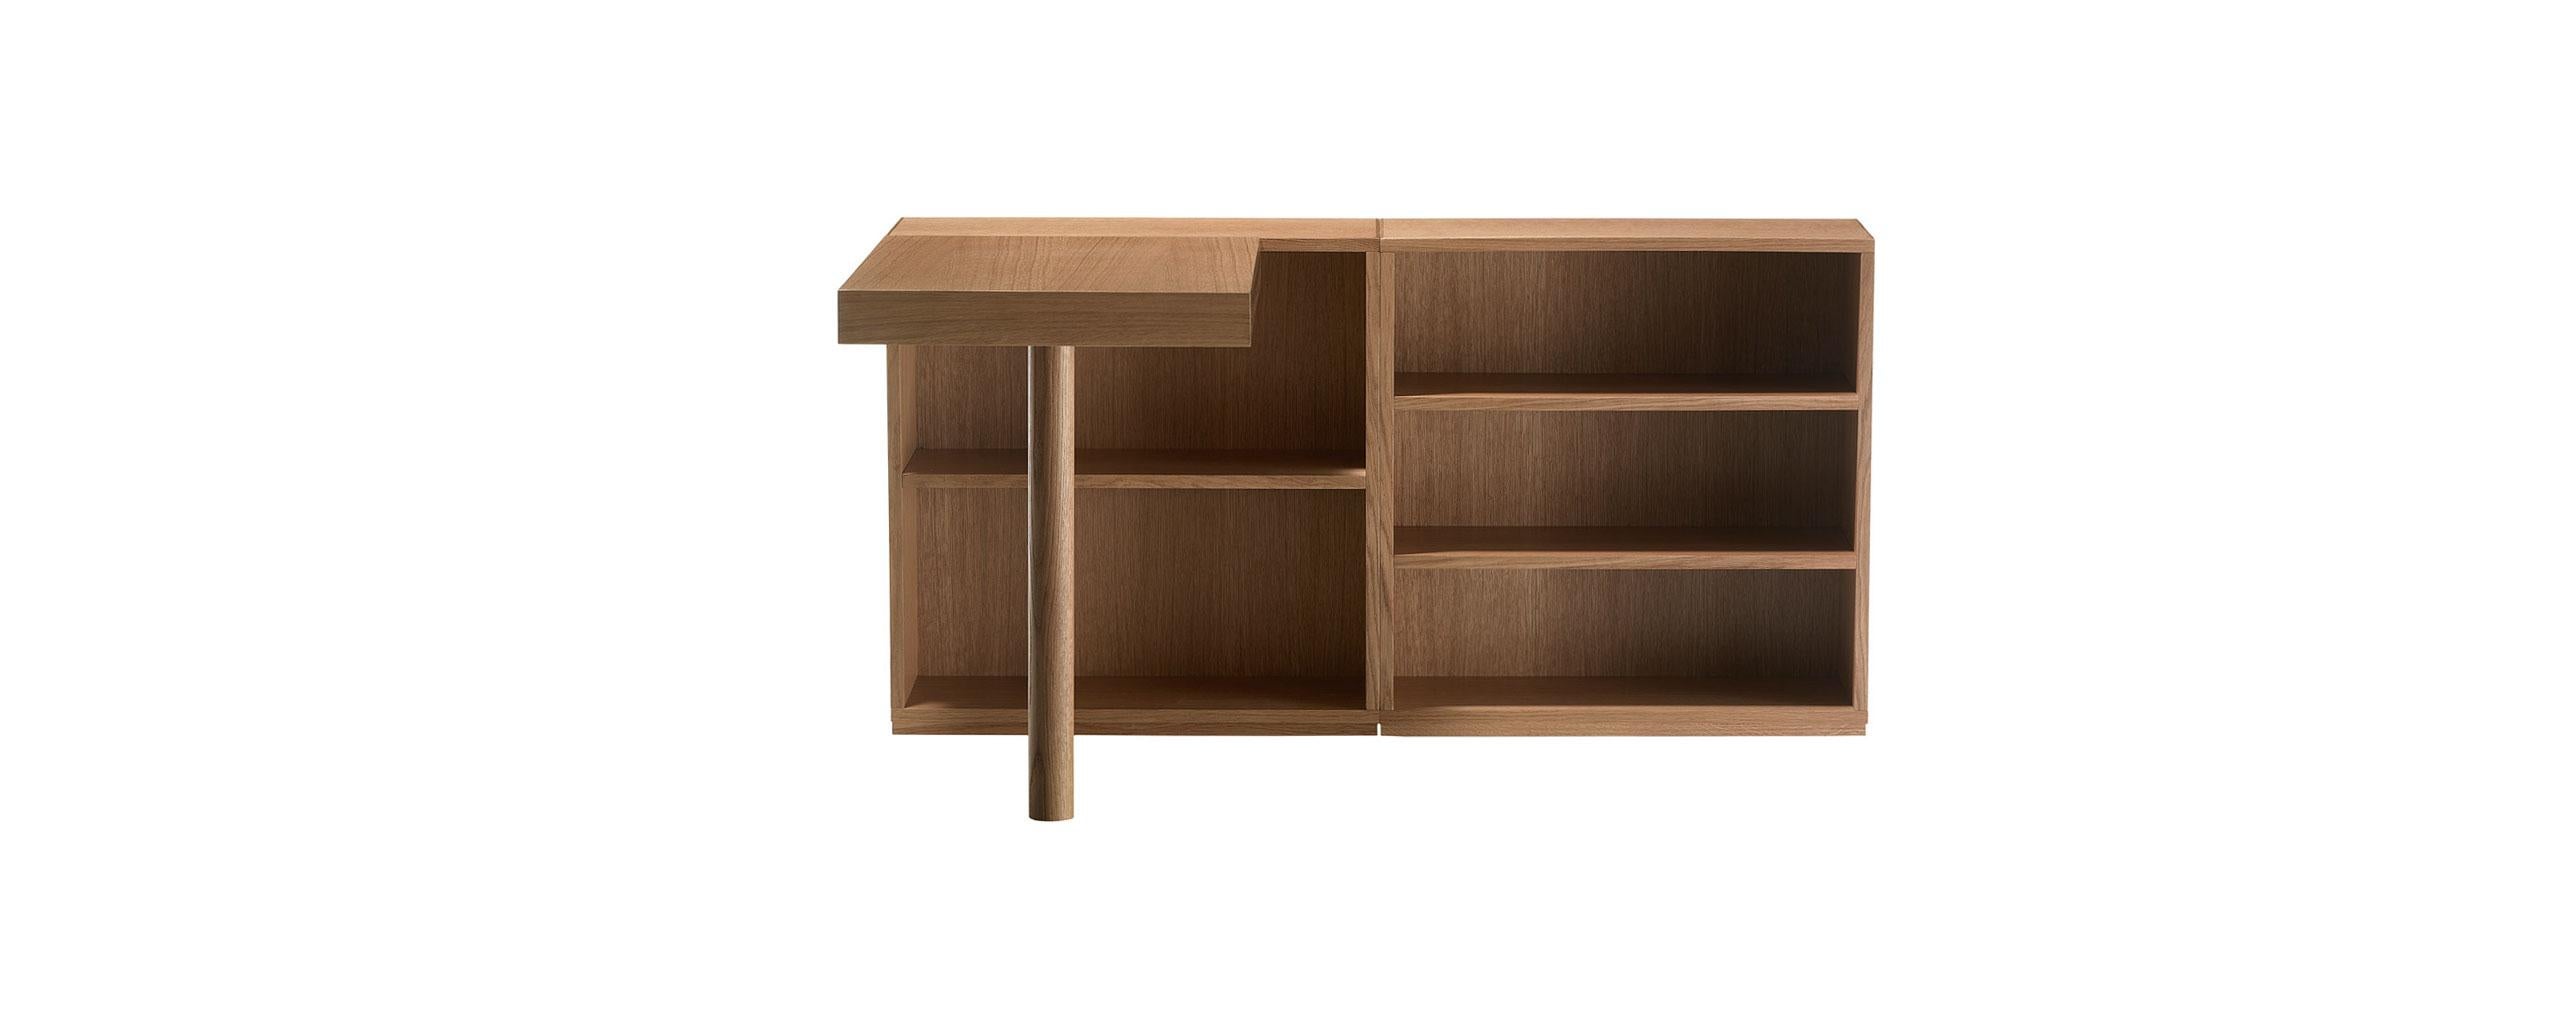 Writing desk designed by Le Corbusier in 1957. Relaunched in 2010.
Manufactured by Cassina in Italy.

Defying the laws of physics, going beyond what we normally understand by the conditions of equilibrium, this bookcase is nothing short of a